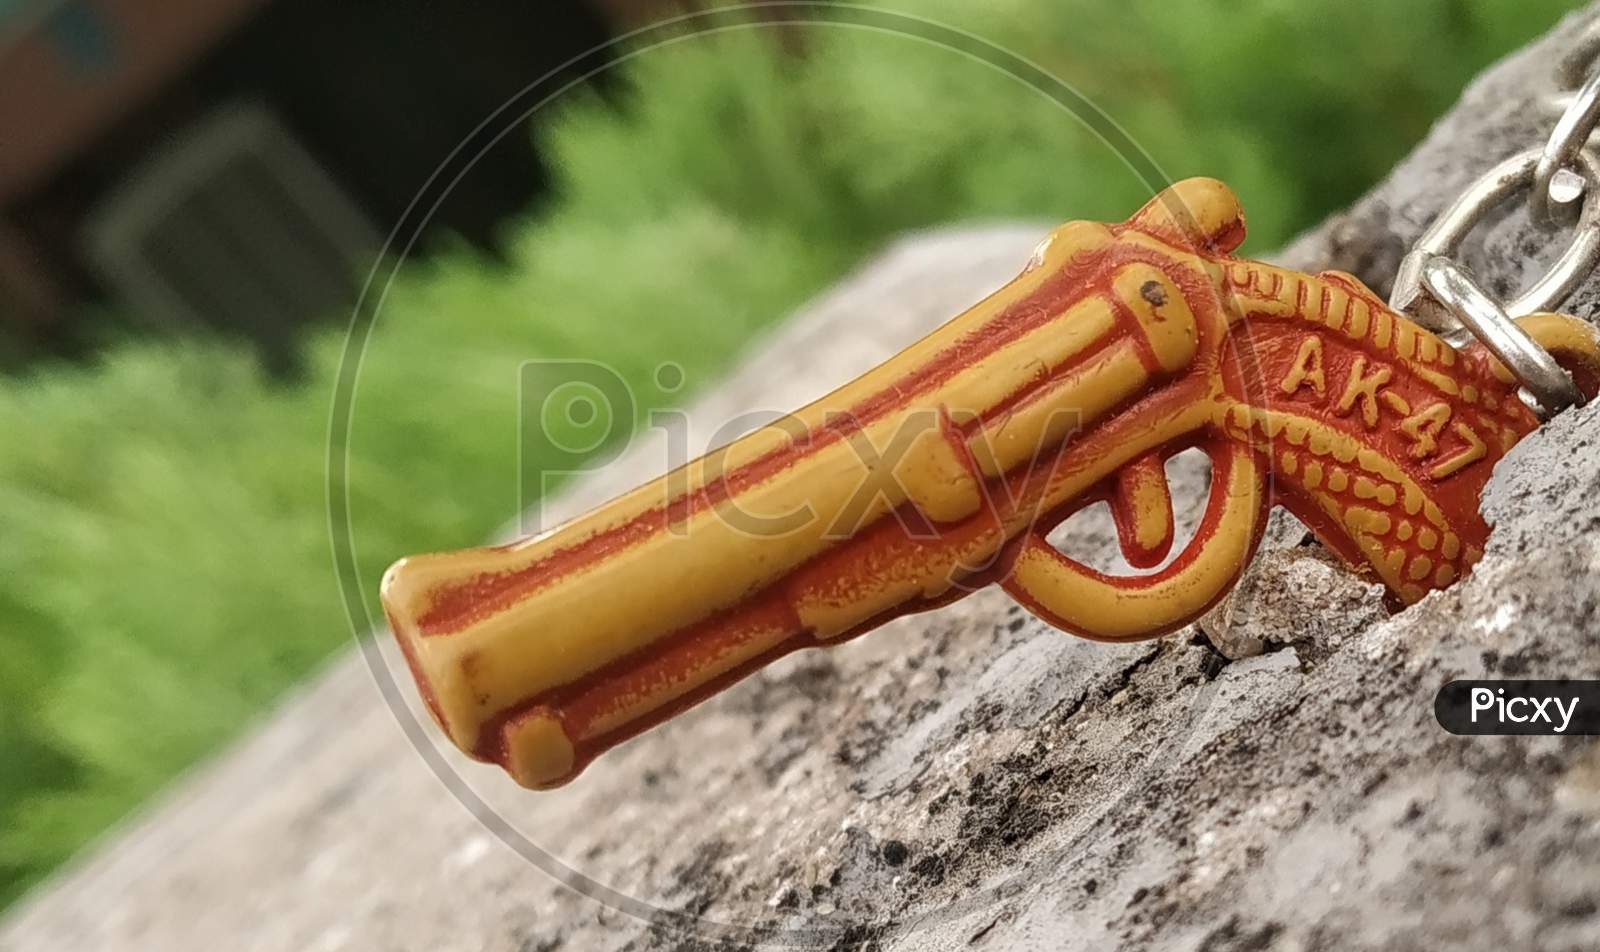 The beautiful pic of pistol which is made of wooden an mini-creature this pic can also be used as an wallpaper